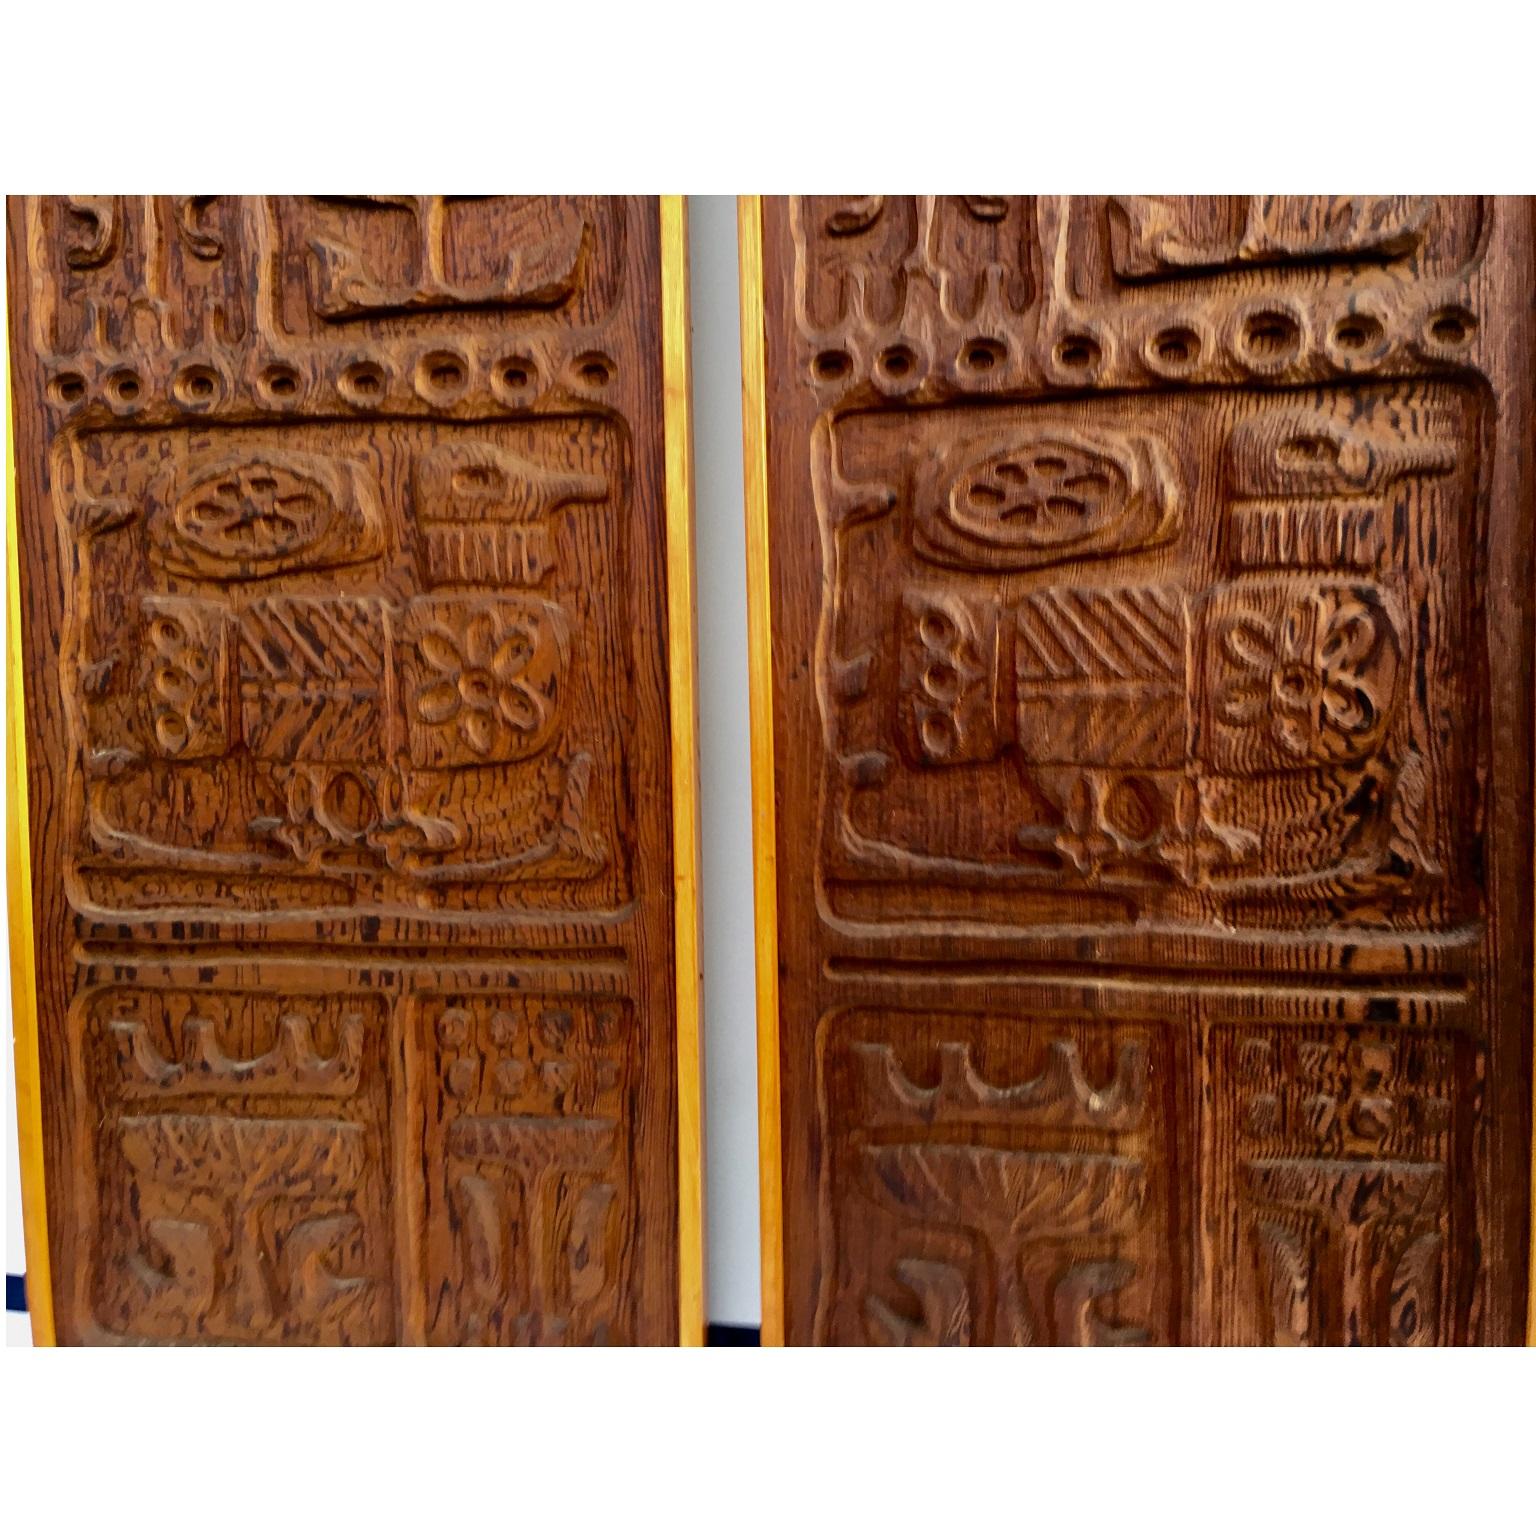 Mid-Century Modern Mcm Rare Pair of Evelyn Ackerman Wood Carved Panels for Panelcarve Evie’s Birds